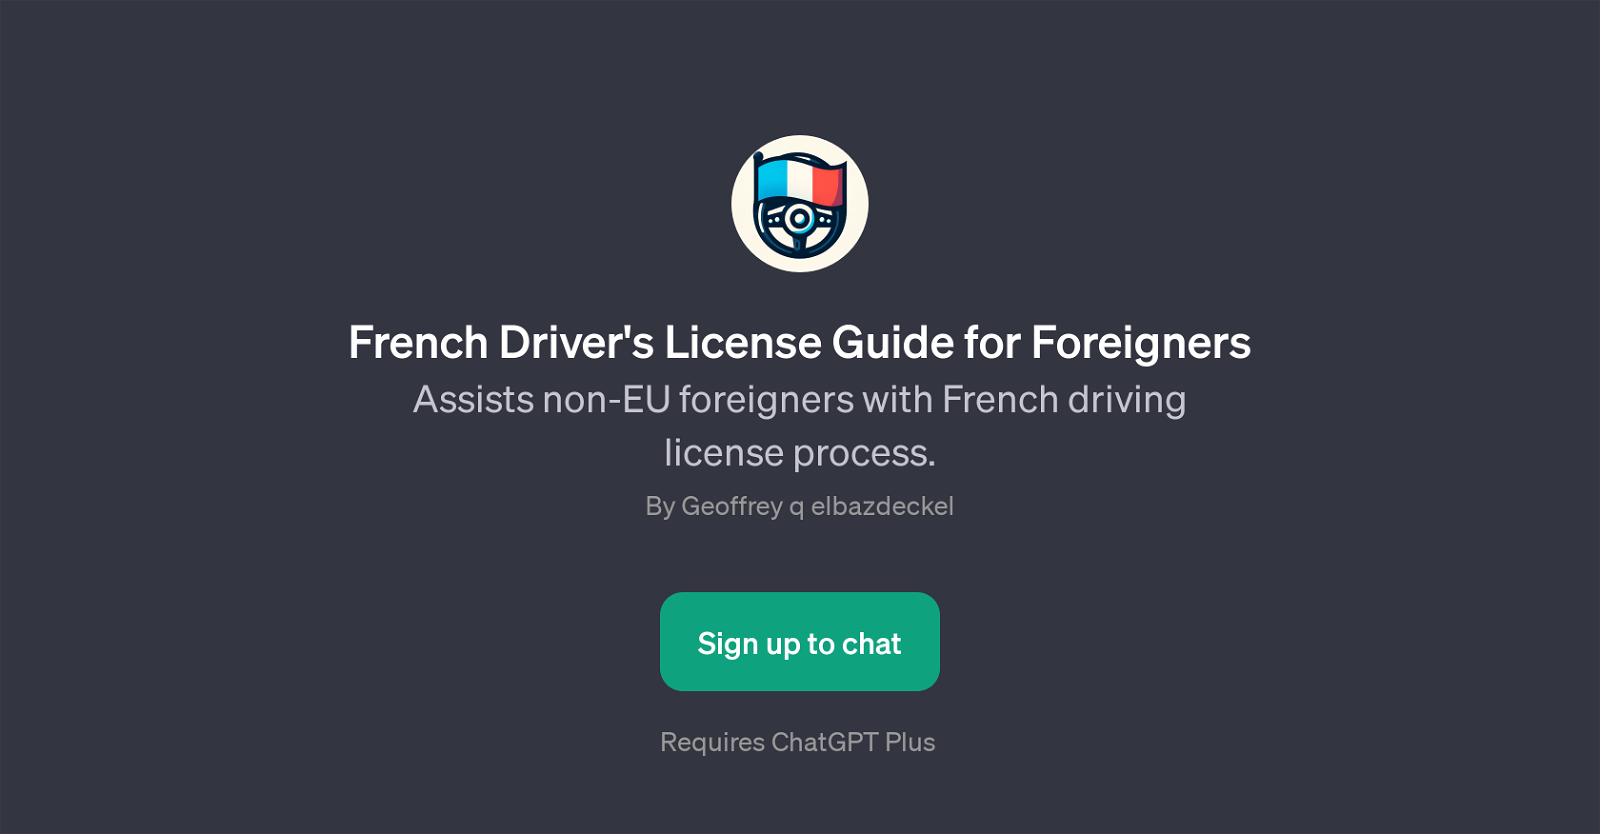 French Driver's License Guide for Foreigners website